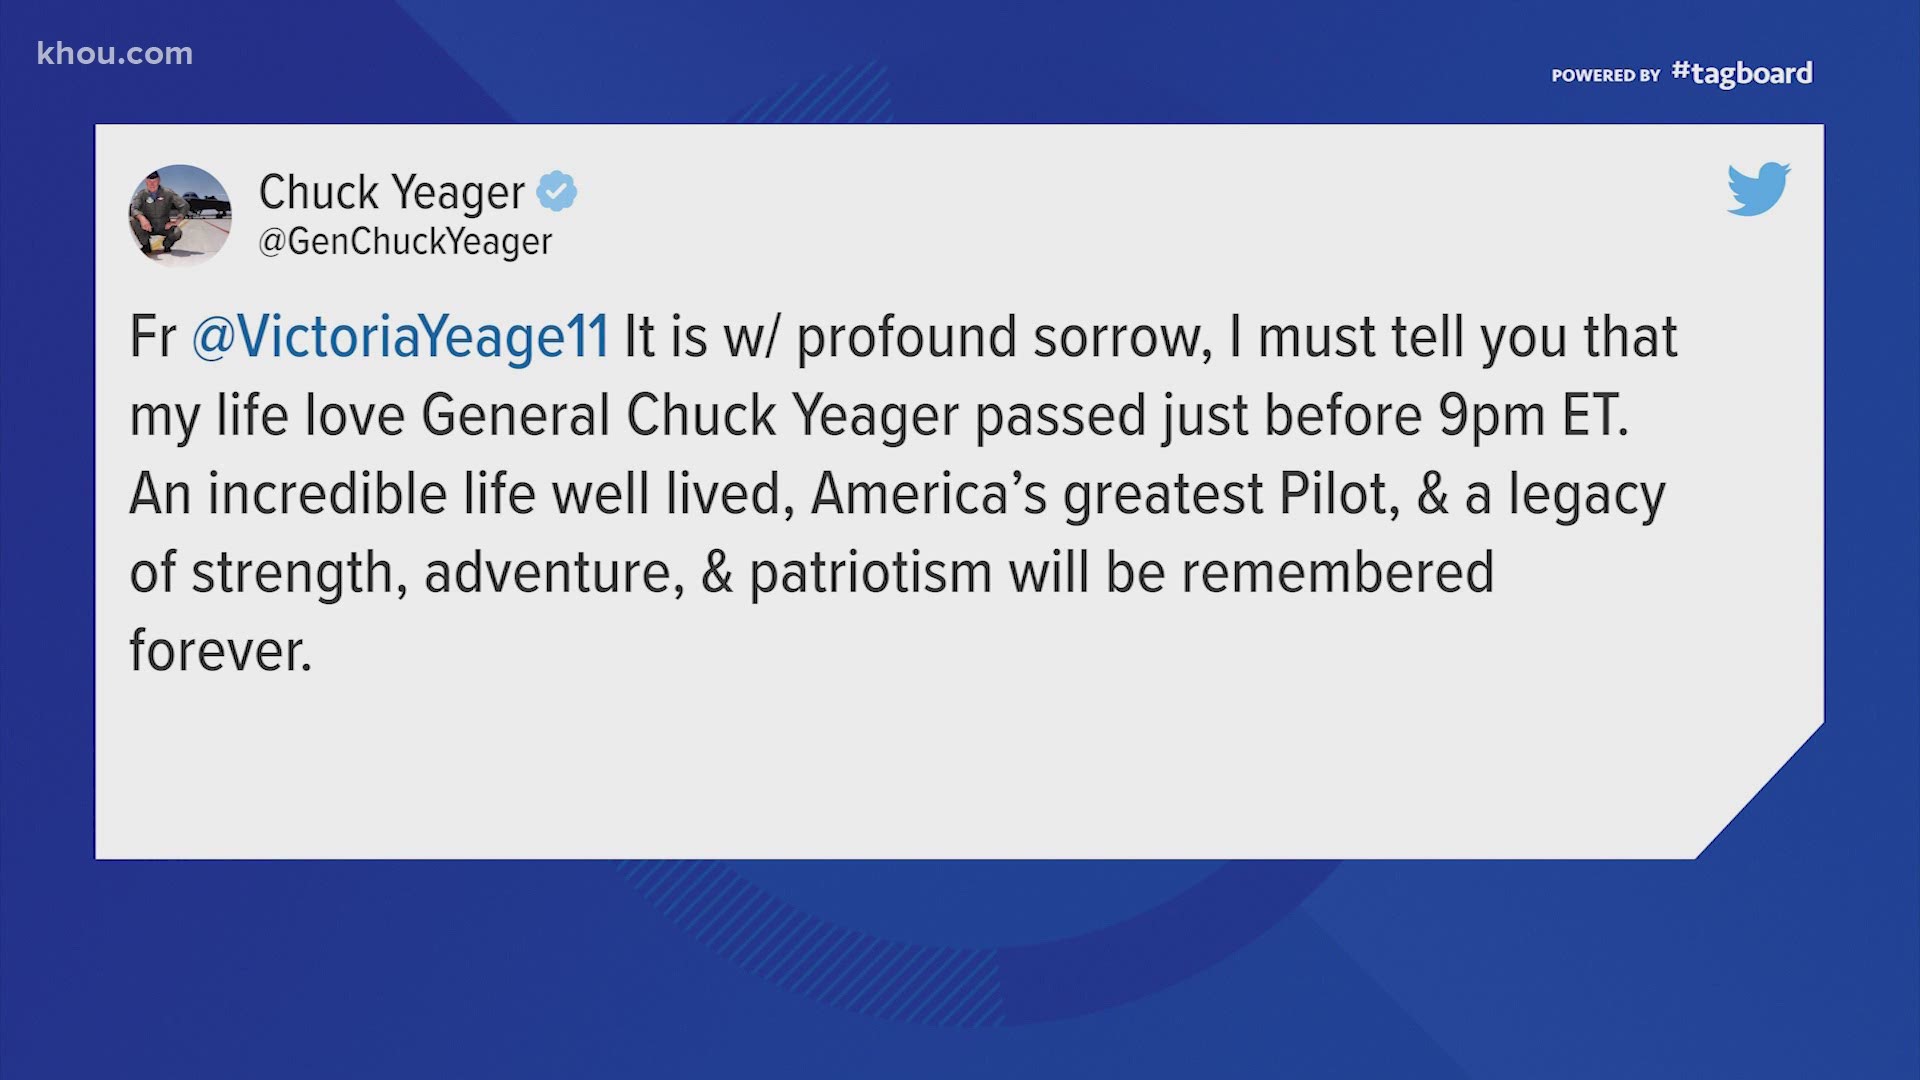 Chuck Yeager was of the U.S. Air Force's most decorated test pilots and was portrayed in the movie 'The Right Stuff.'